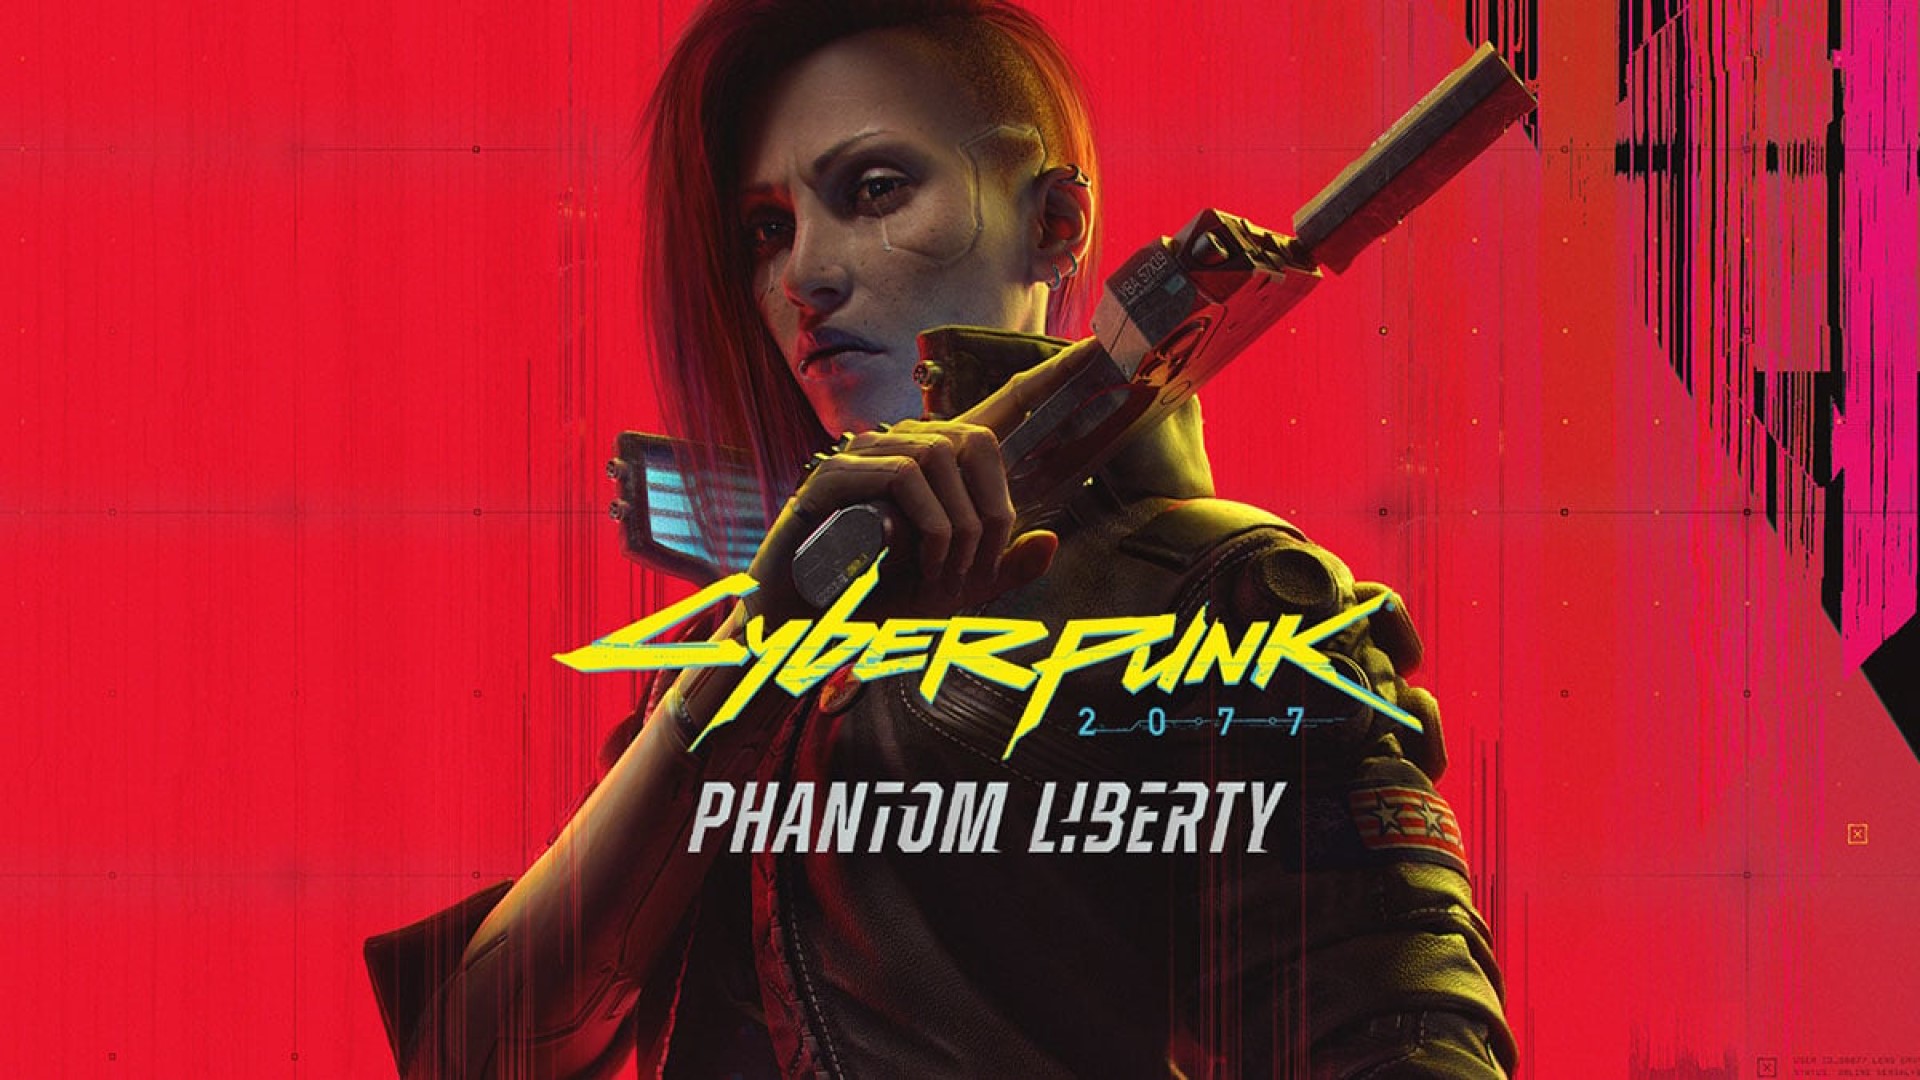 Cyberpunk 2077 Ultimate Edition Announced and Will Be Available Both  Digitally and Physically